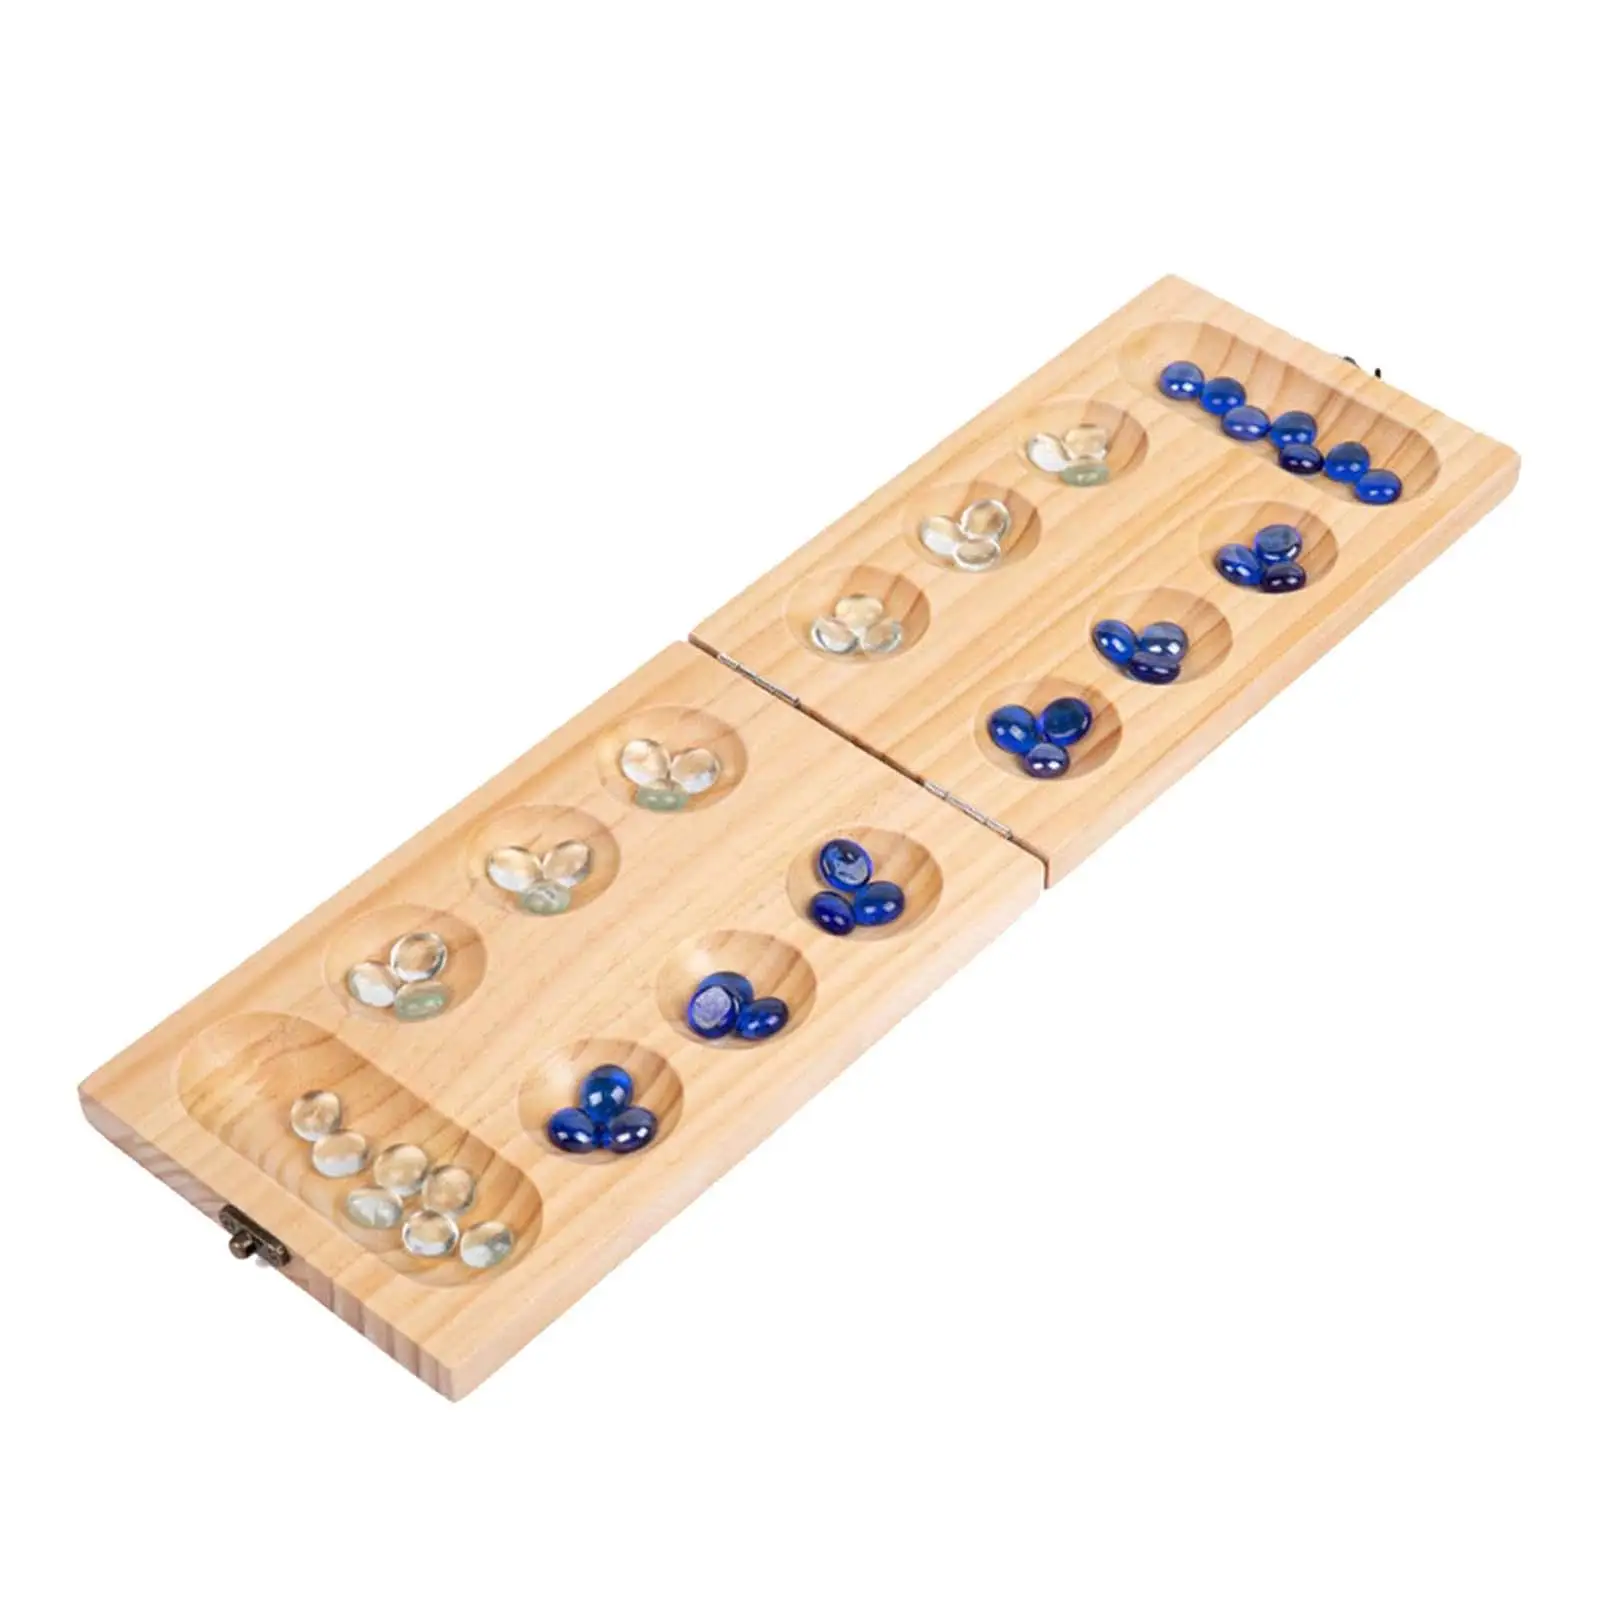 Wooden Mancala Board Game Portable Classic 2 Player Game Family Games for Children and Adults Party Entertainment Teen Travel